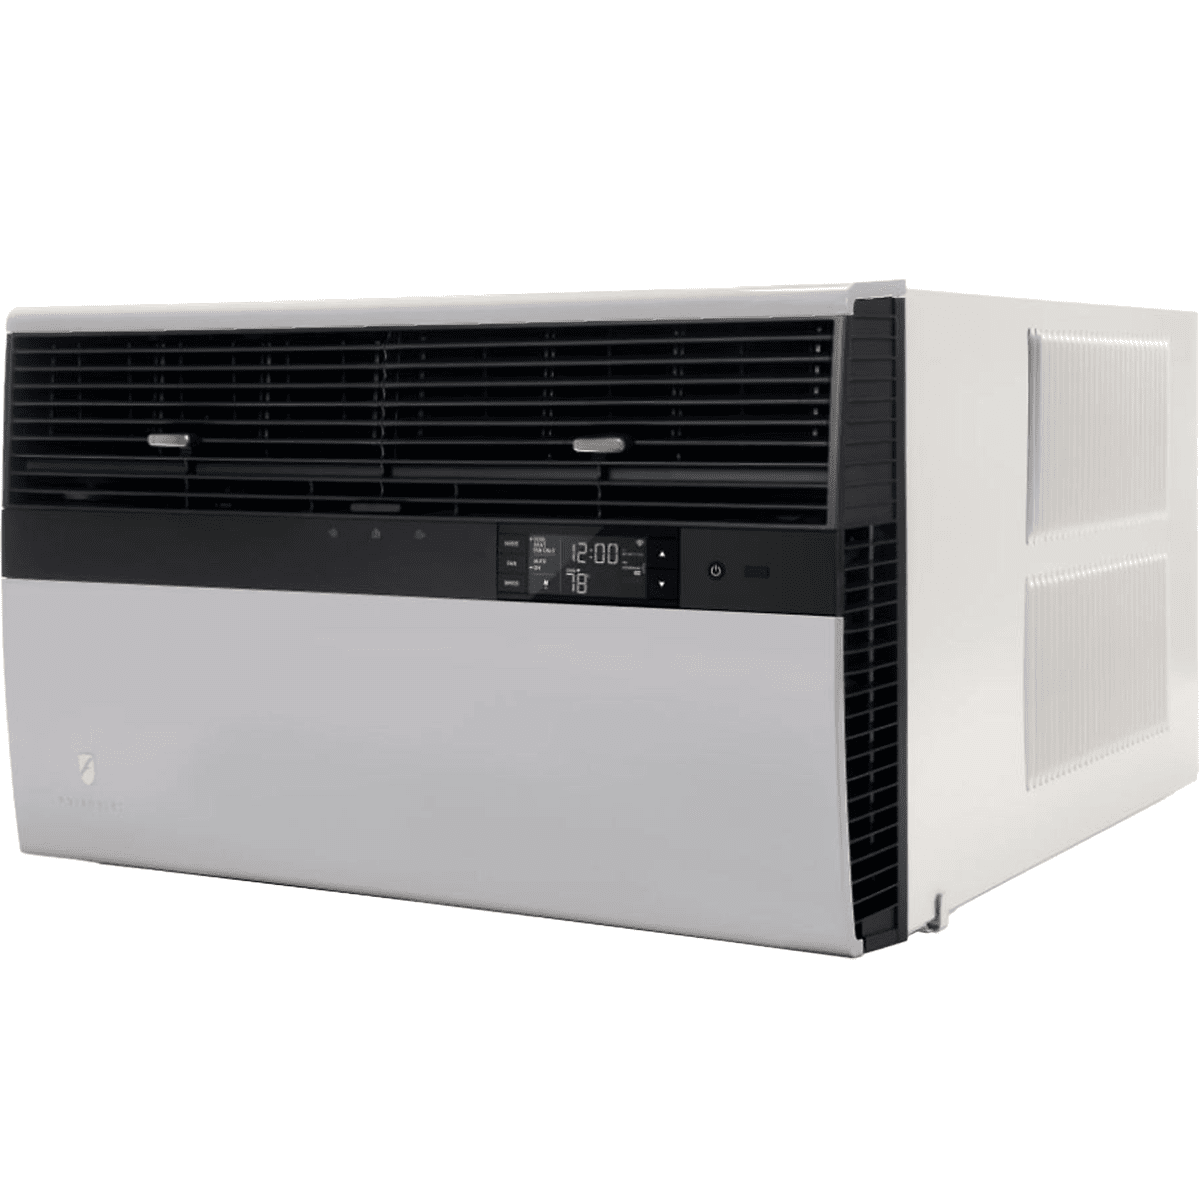 Friedrich Kuhl 22,300 Commercial Window & Wall Air Conditioner